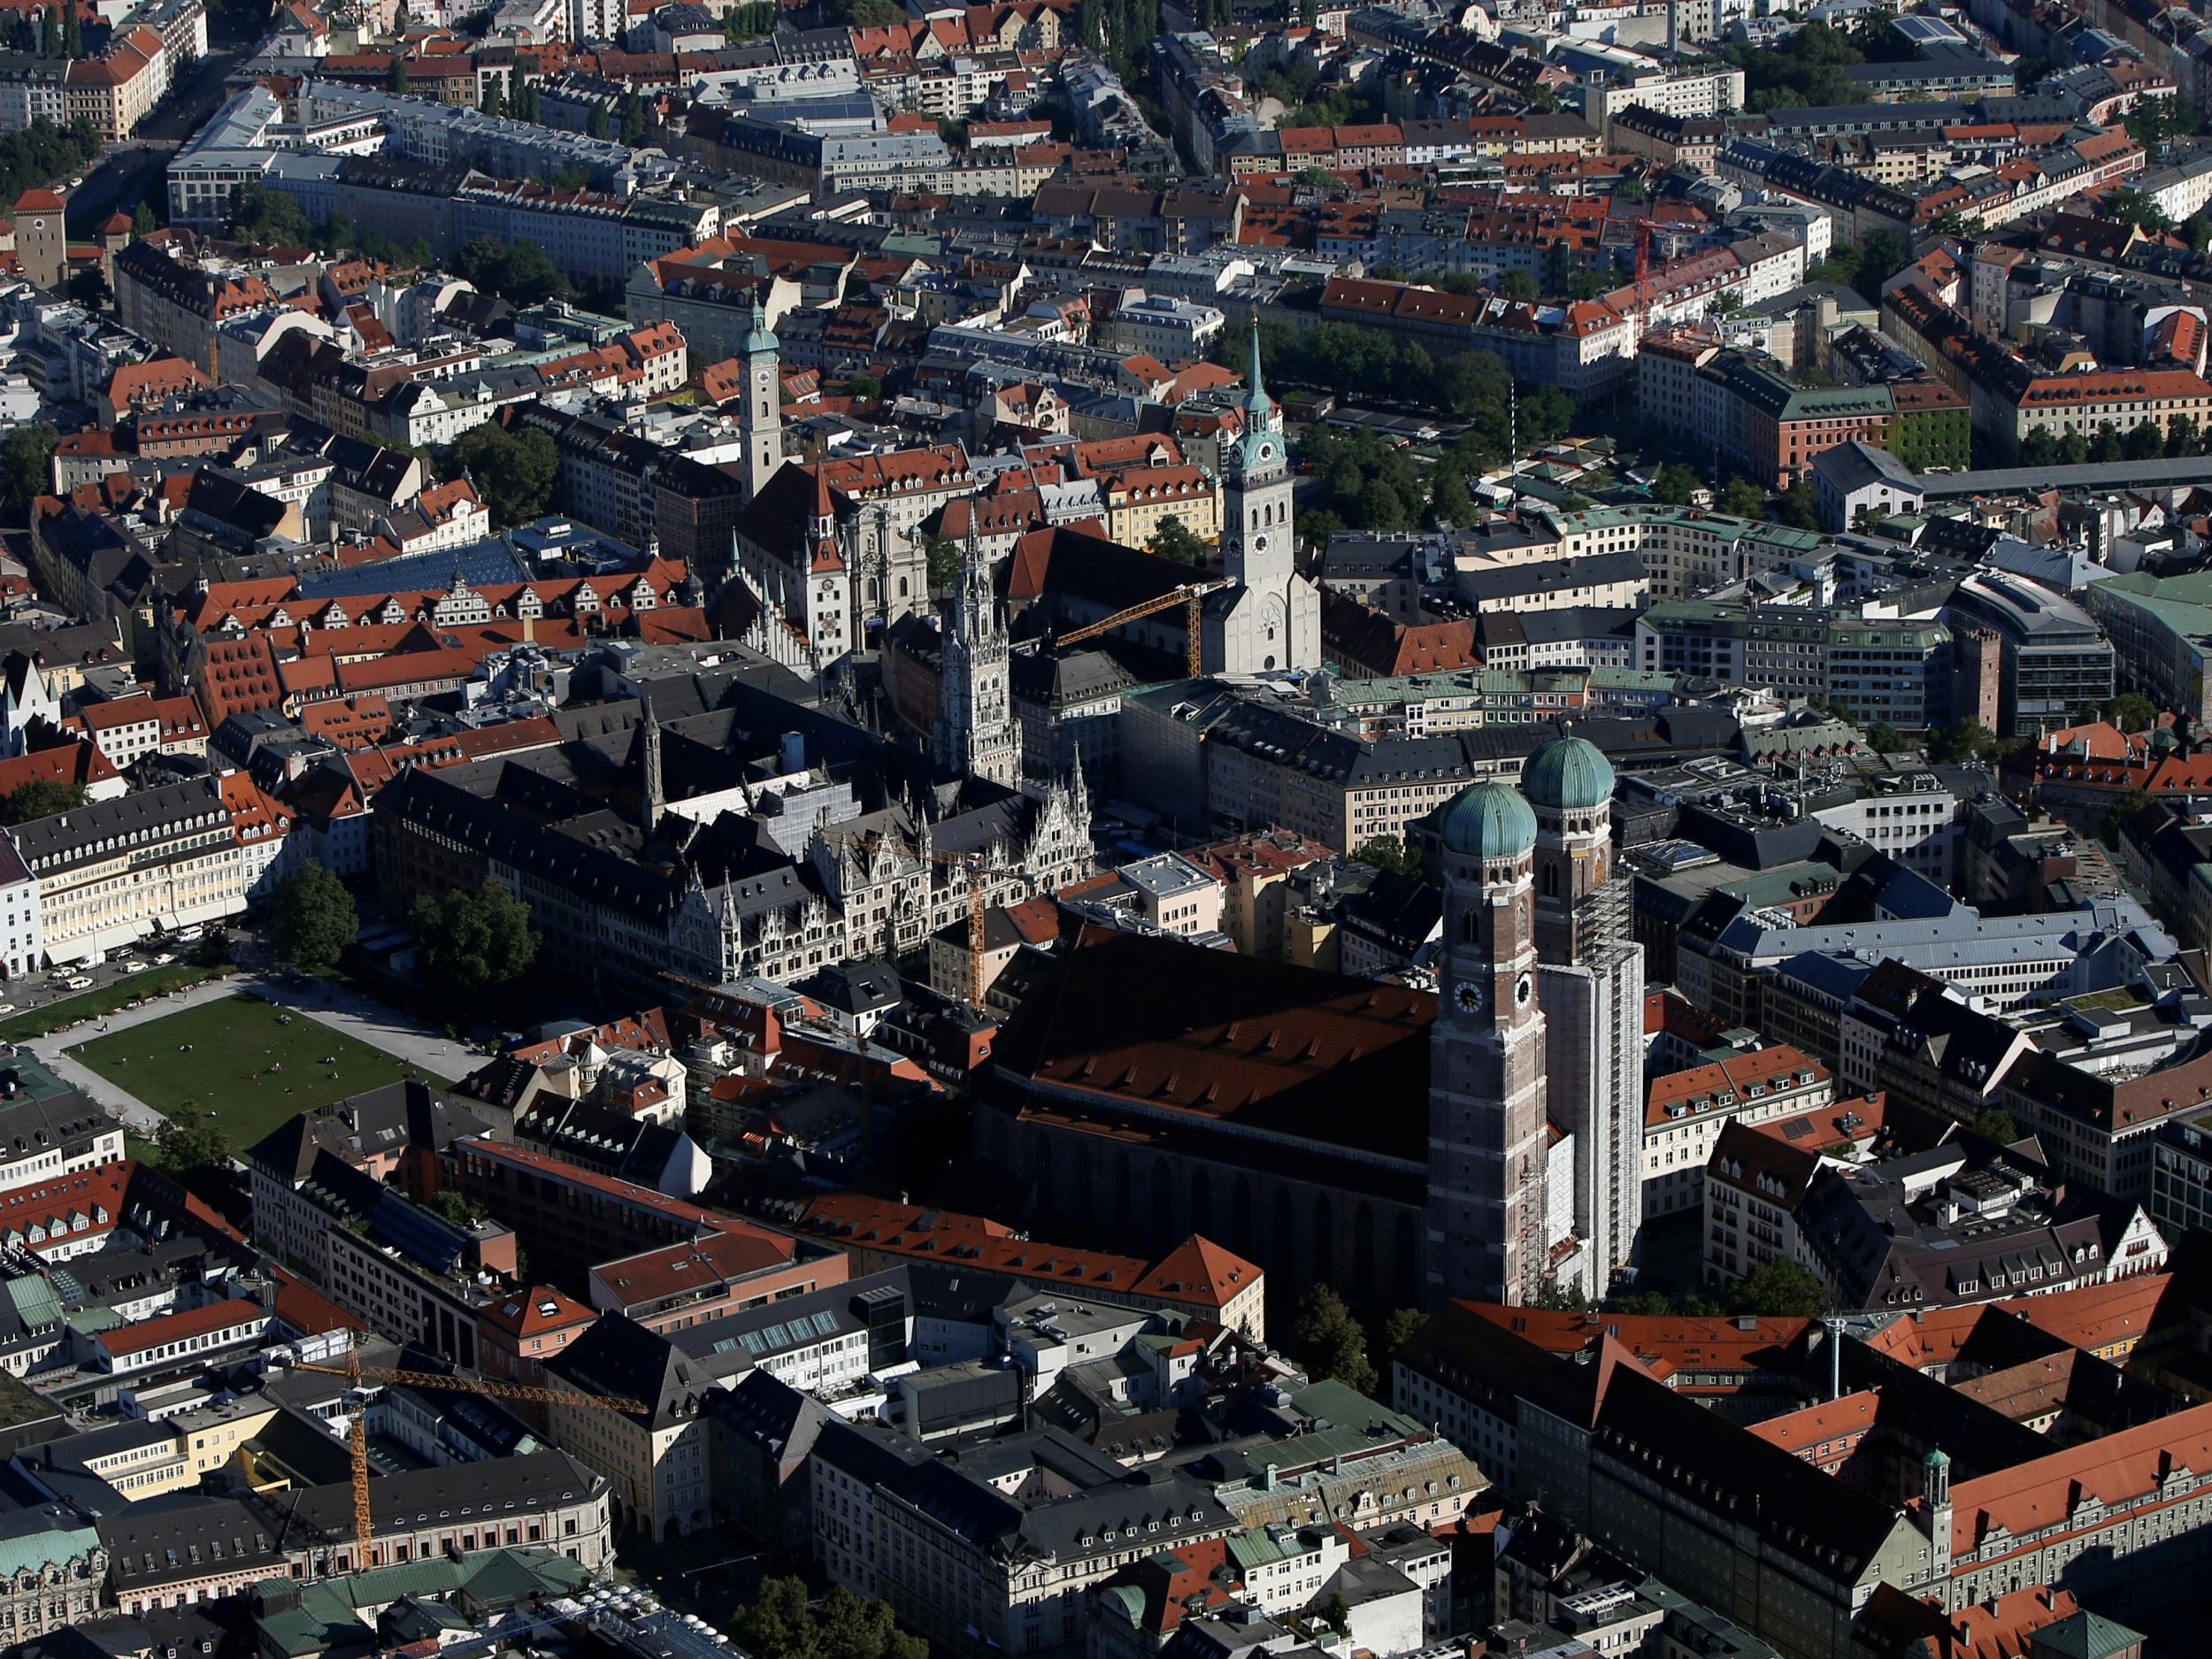 The incident took place at Marienplatz square close to the Bavarian capital's city hall